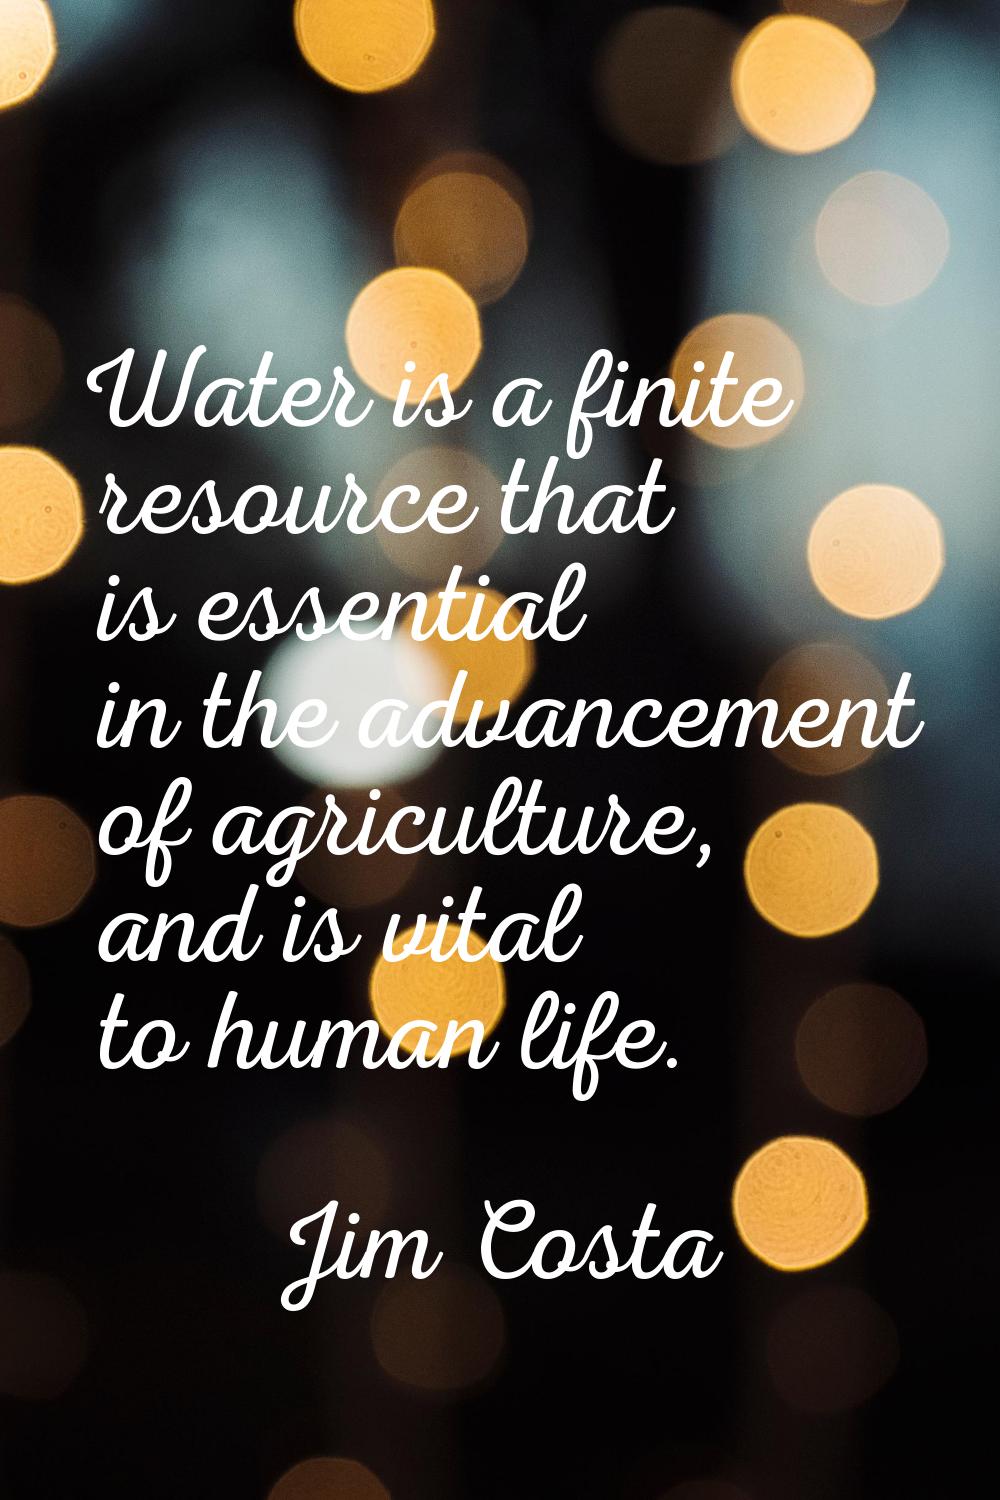 Water is a finite resource that is essential in the advancement of agriculture, and is vital to hum